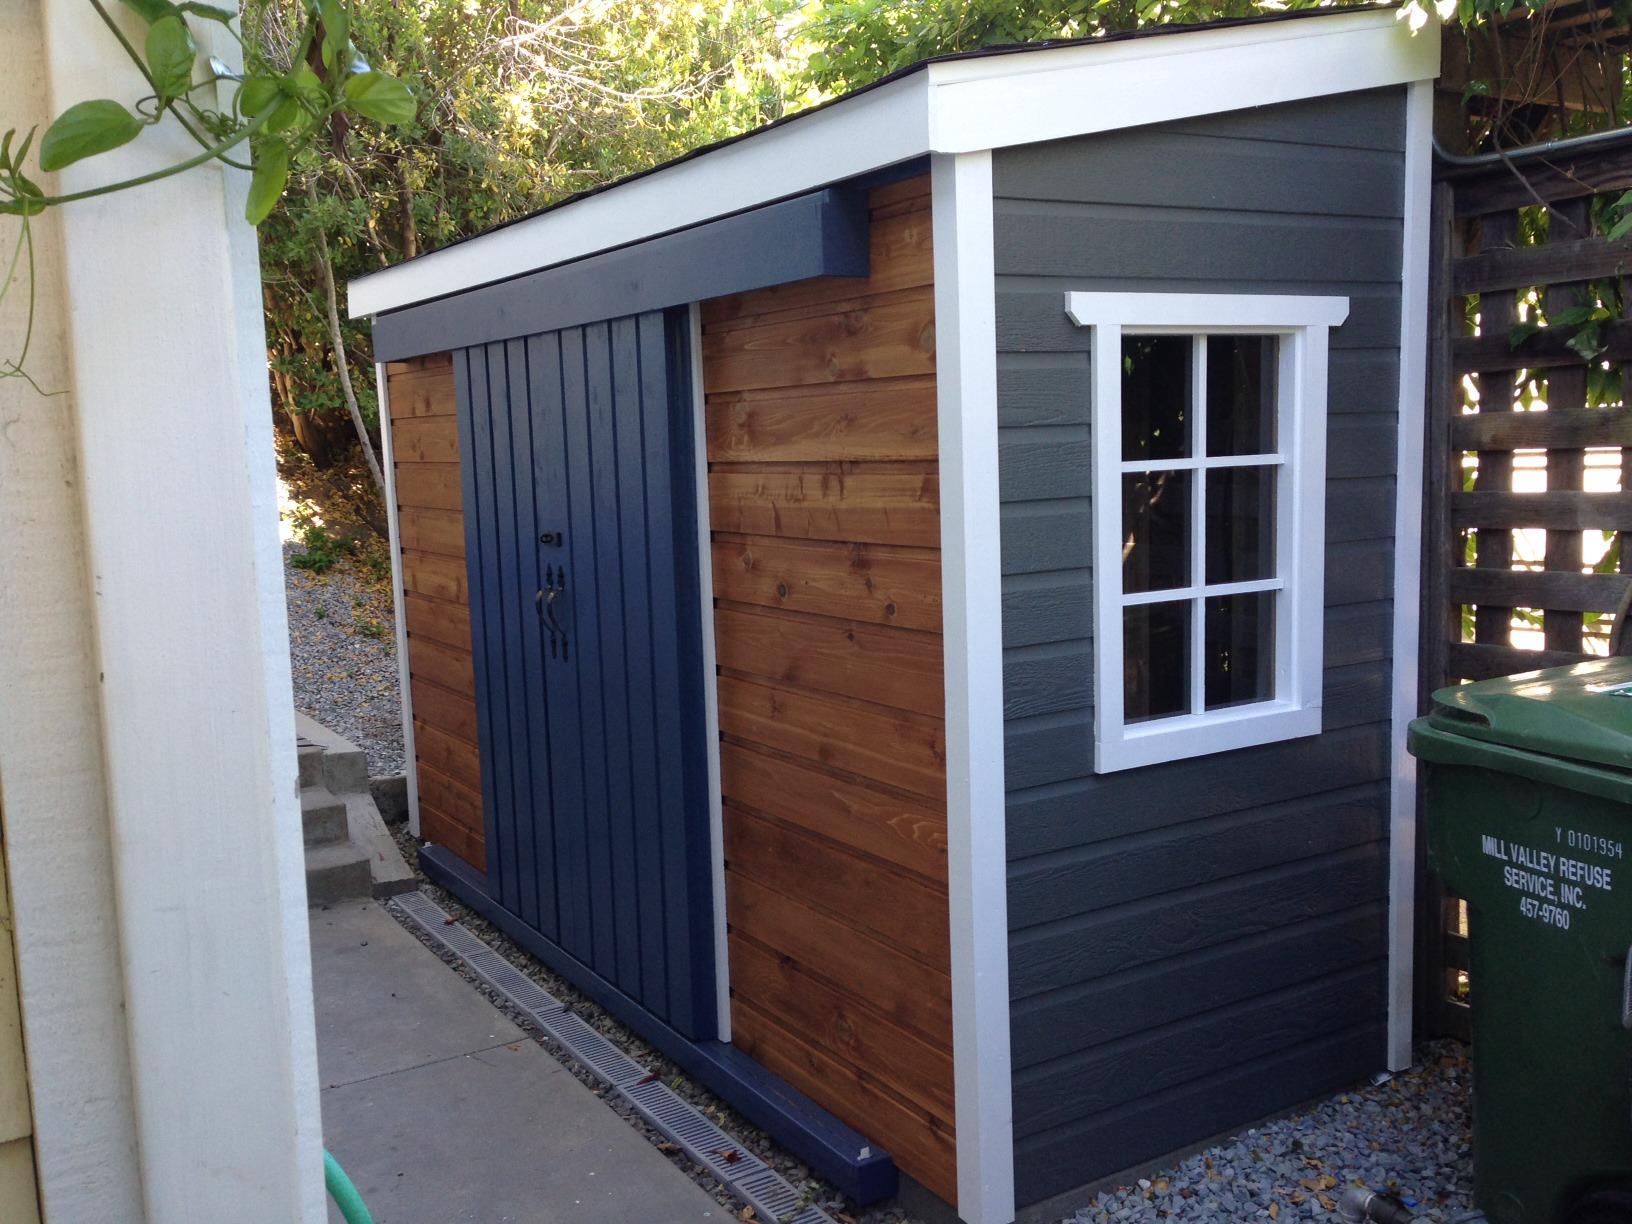 Cedar Sarawak shed 4x12 with sliding double doors in Mill Valley, California. ID number 178096-1